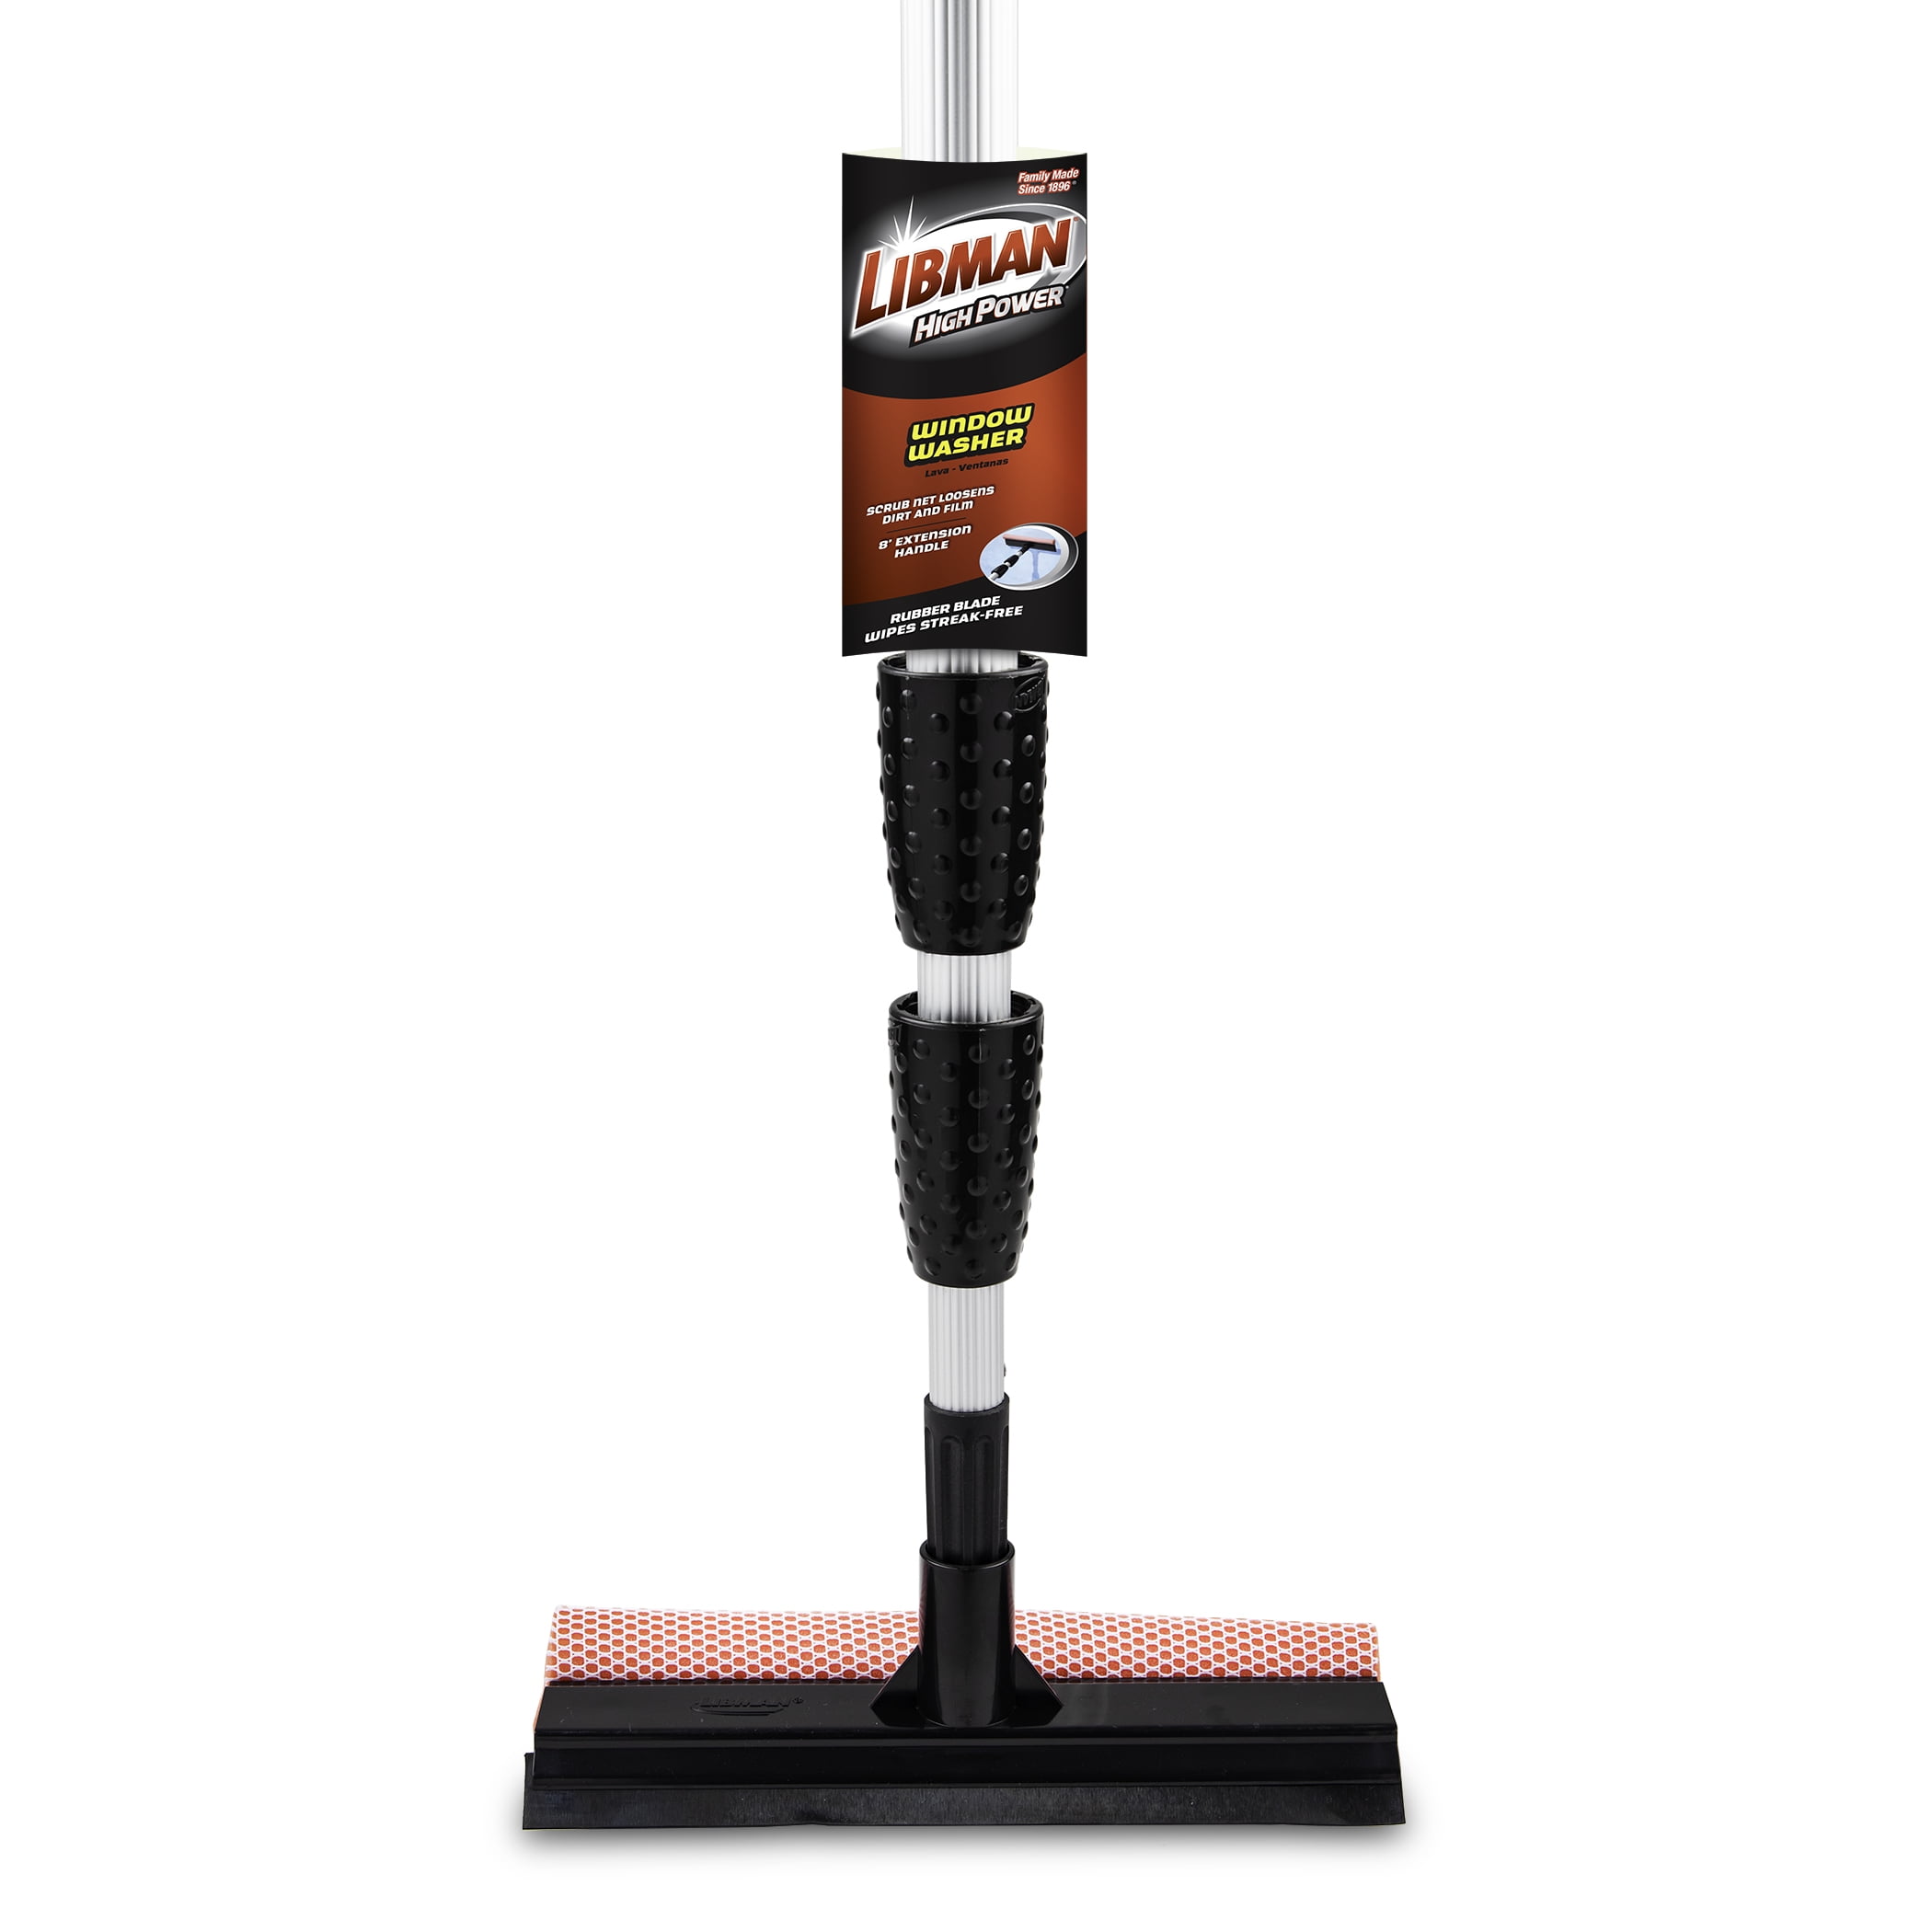 Libman Black and Red Telescopic Window Washer, Squeegee and Sponge Combination